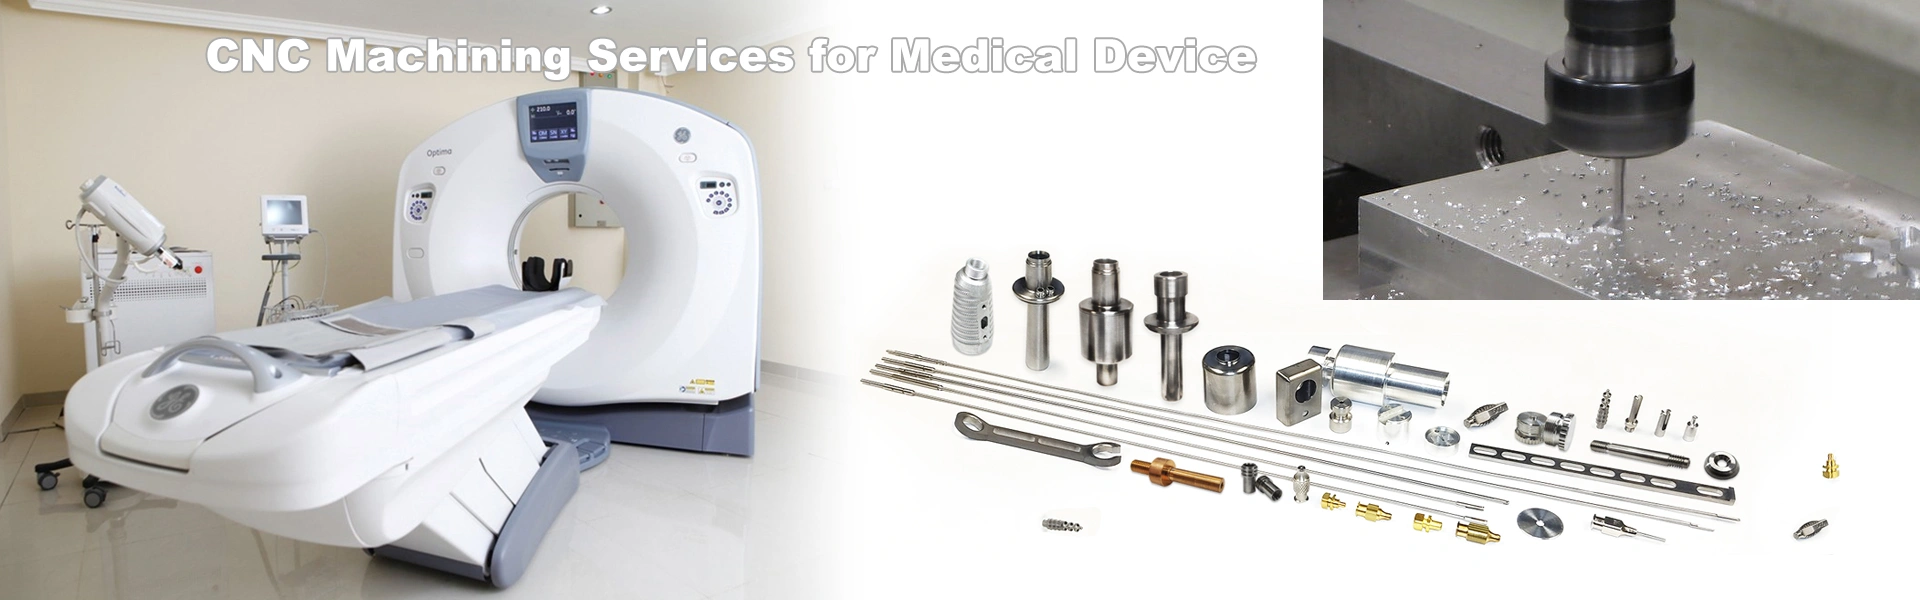 CNC Machining Services for Medical Device